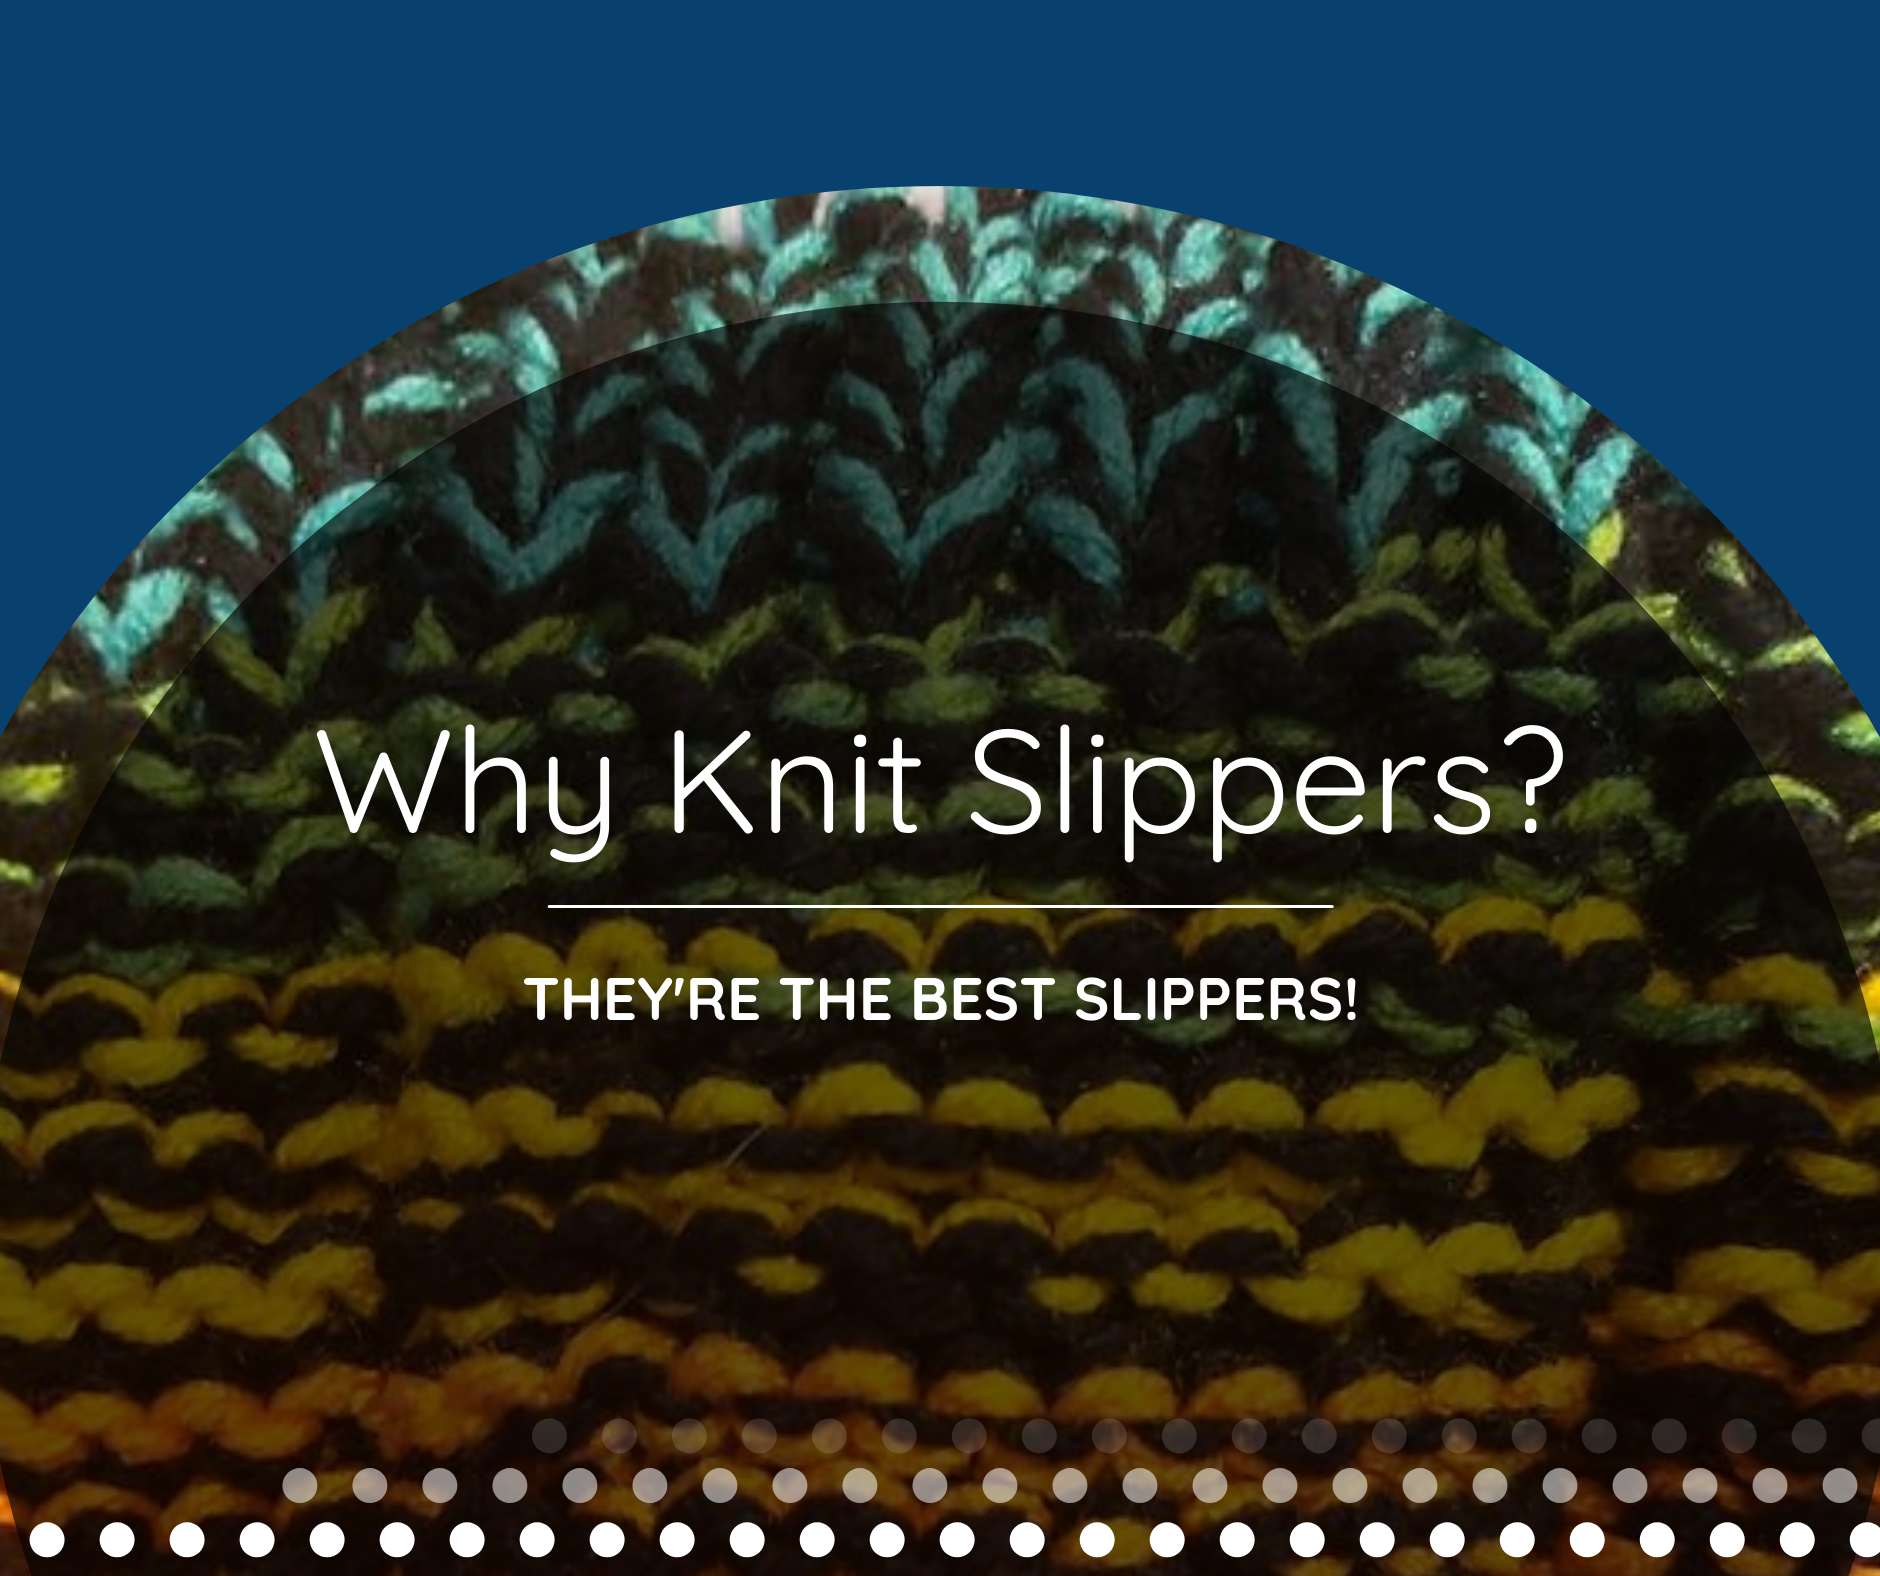 Why Knit Slippers are the Best Slippers